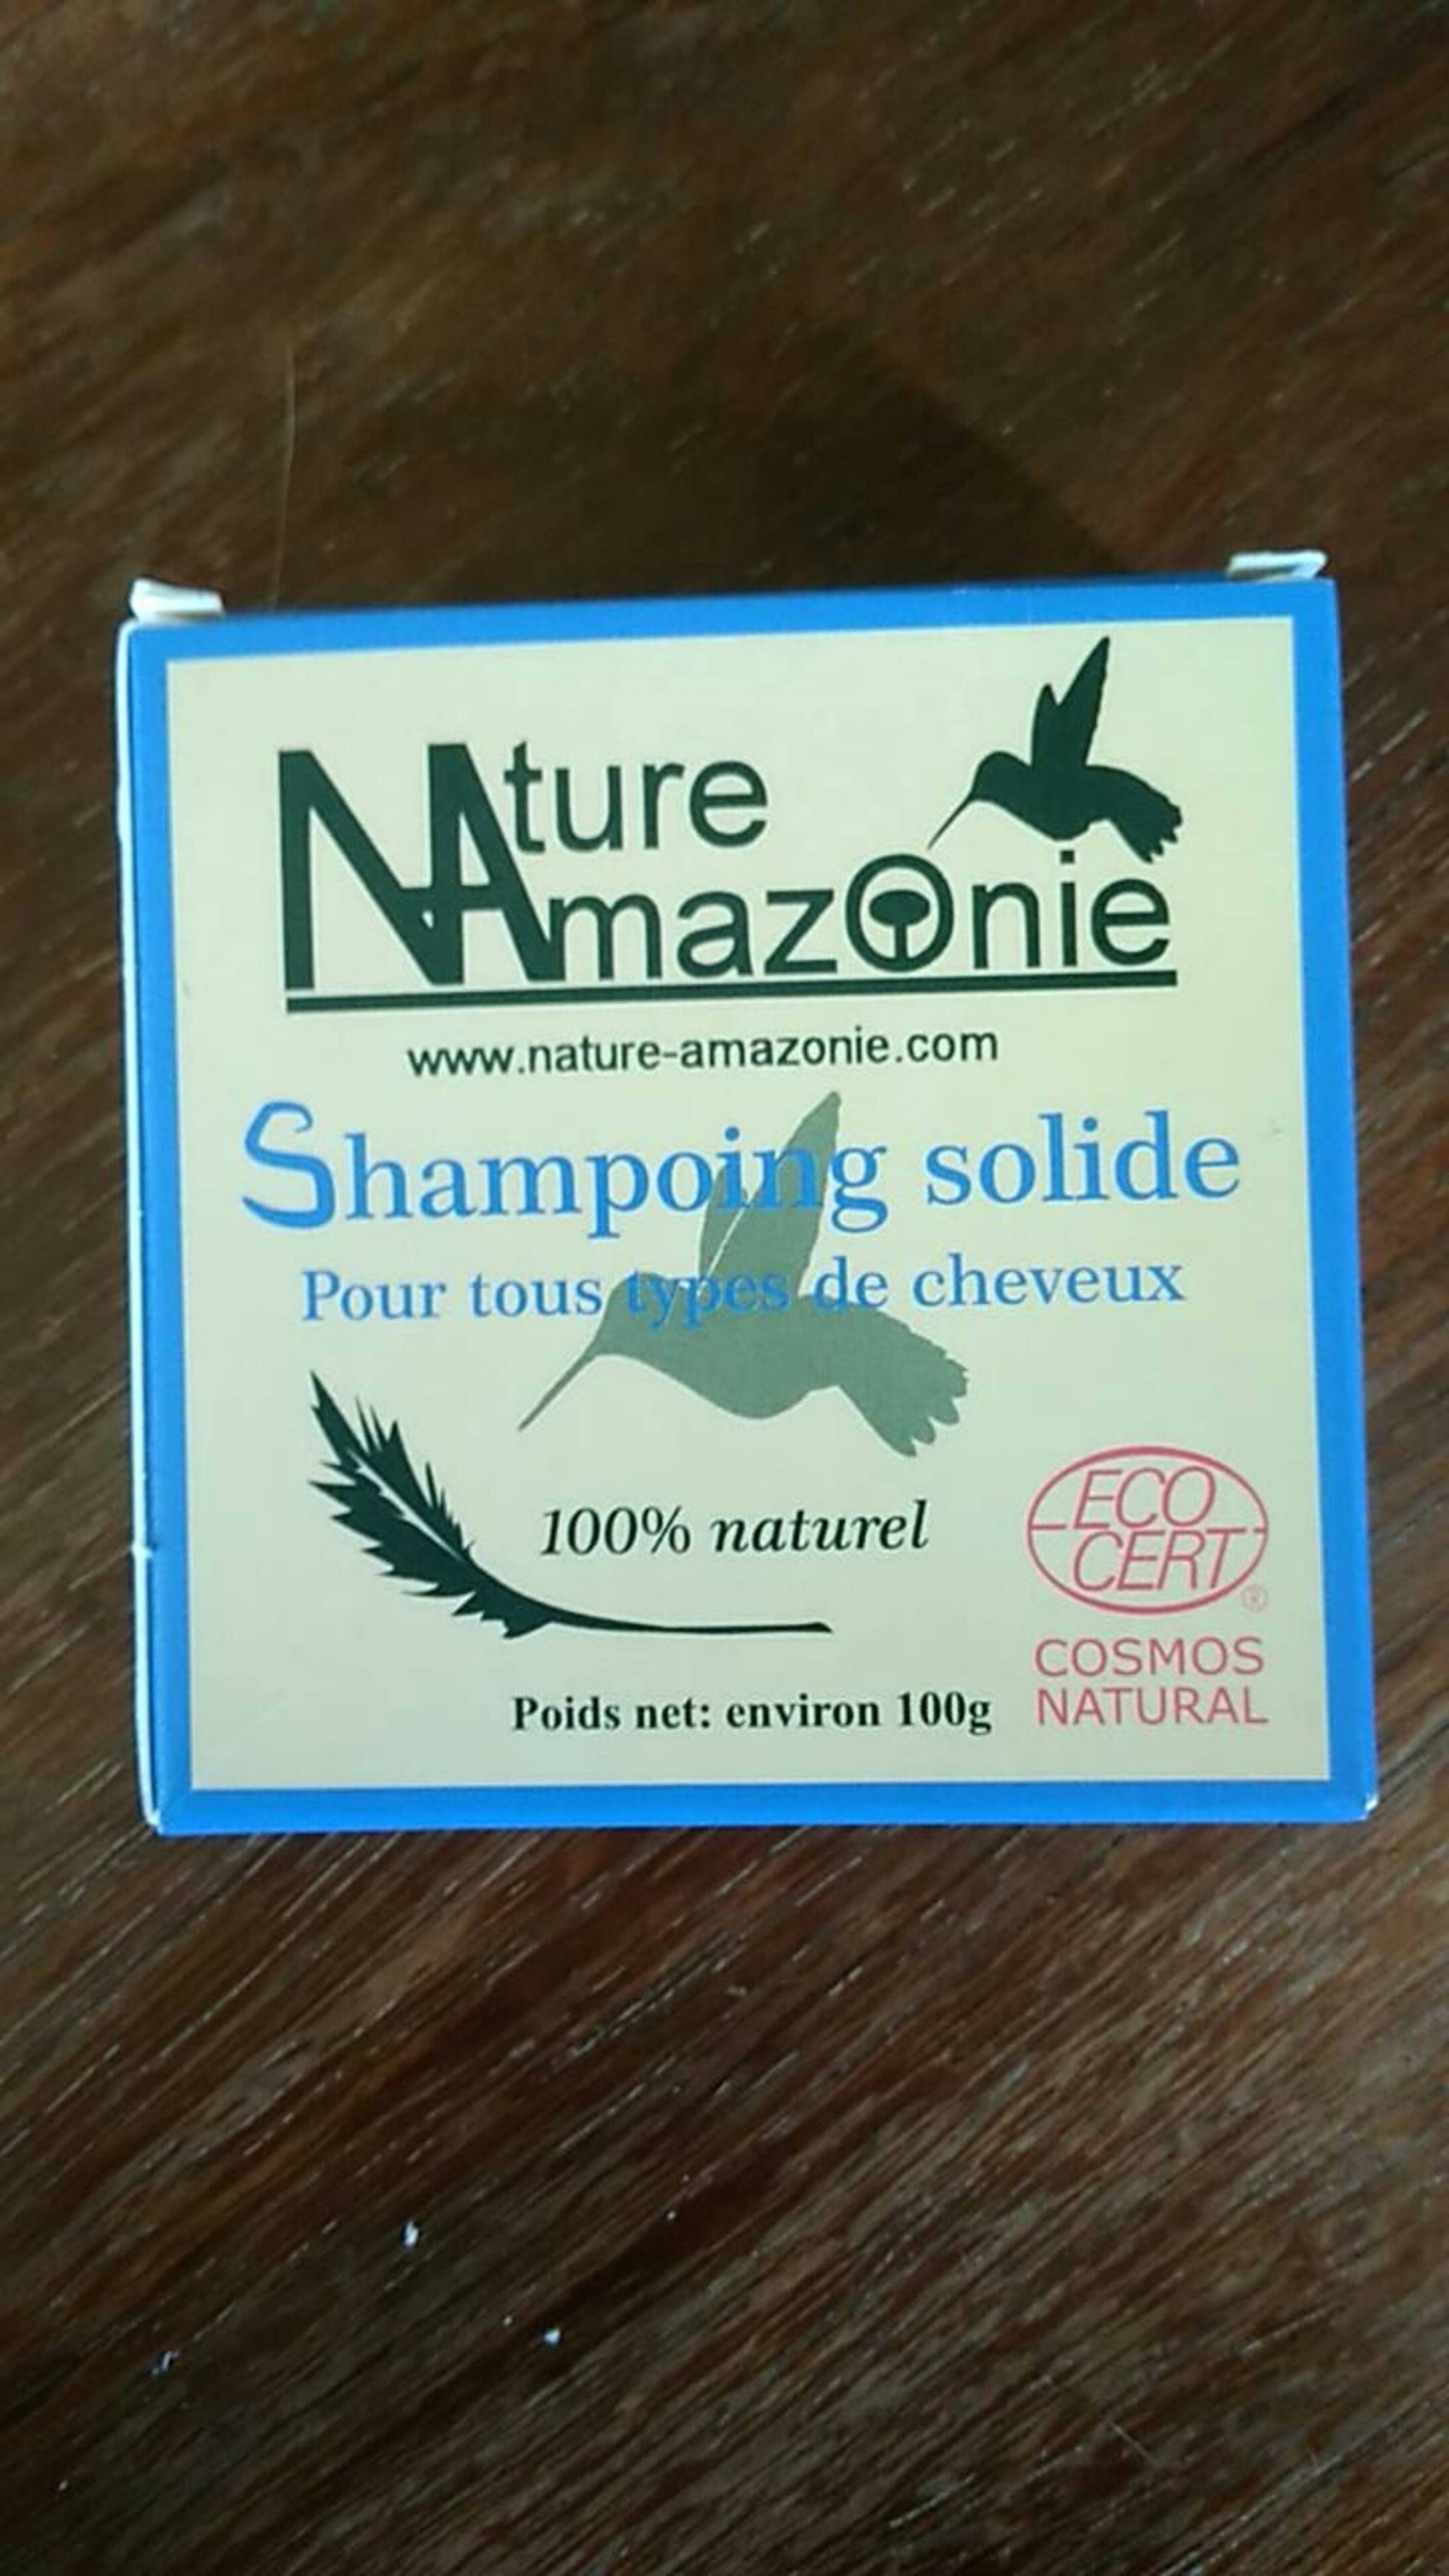 NATURE AMAZONIE - Shampoing solide